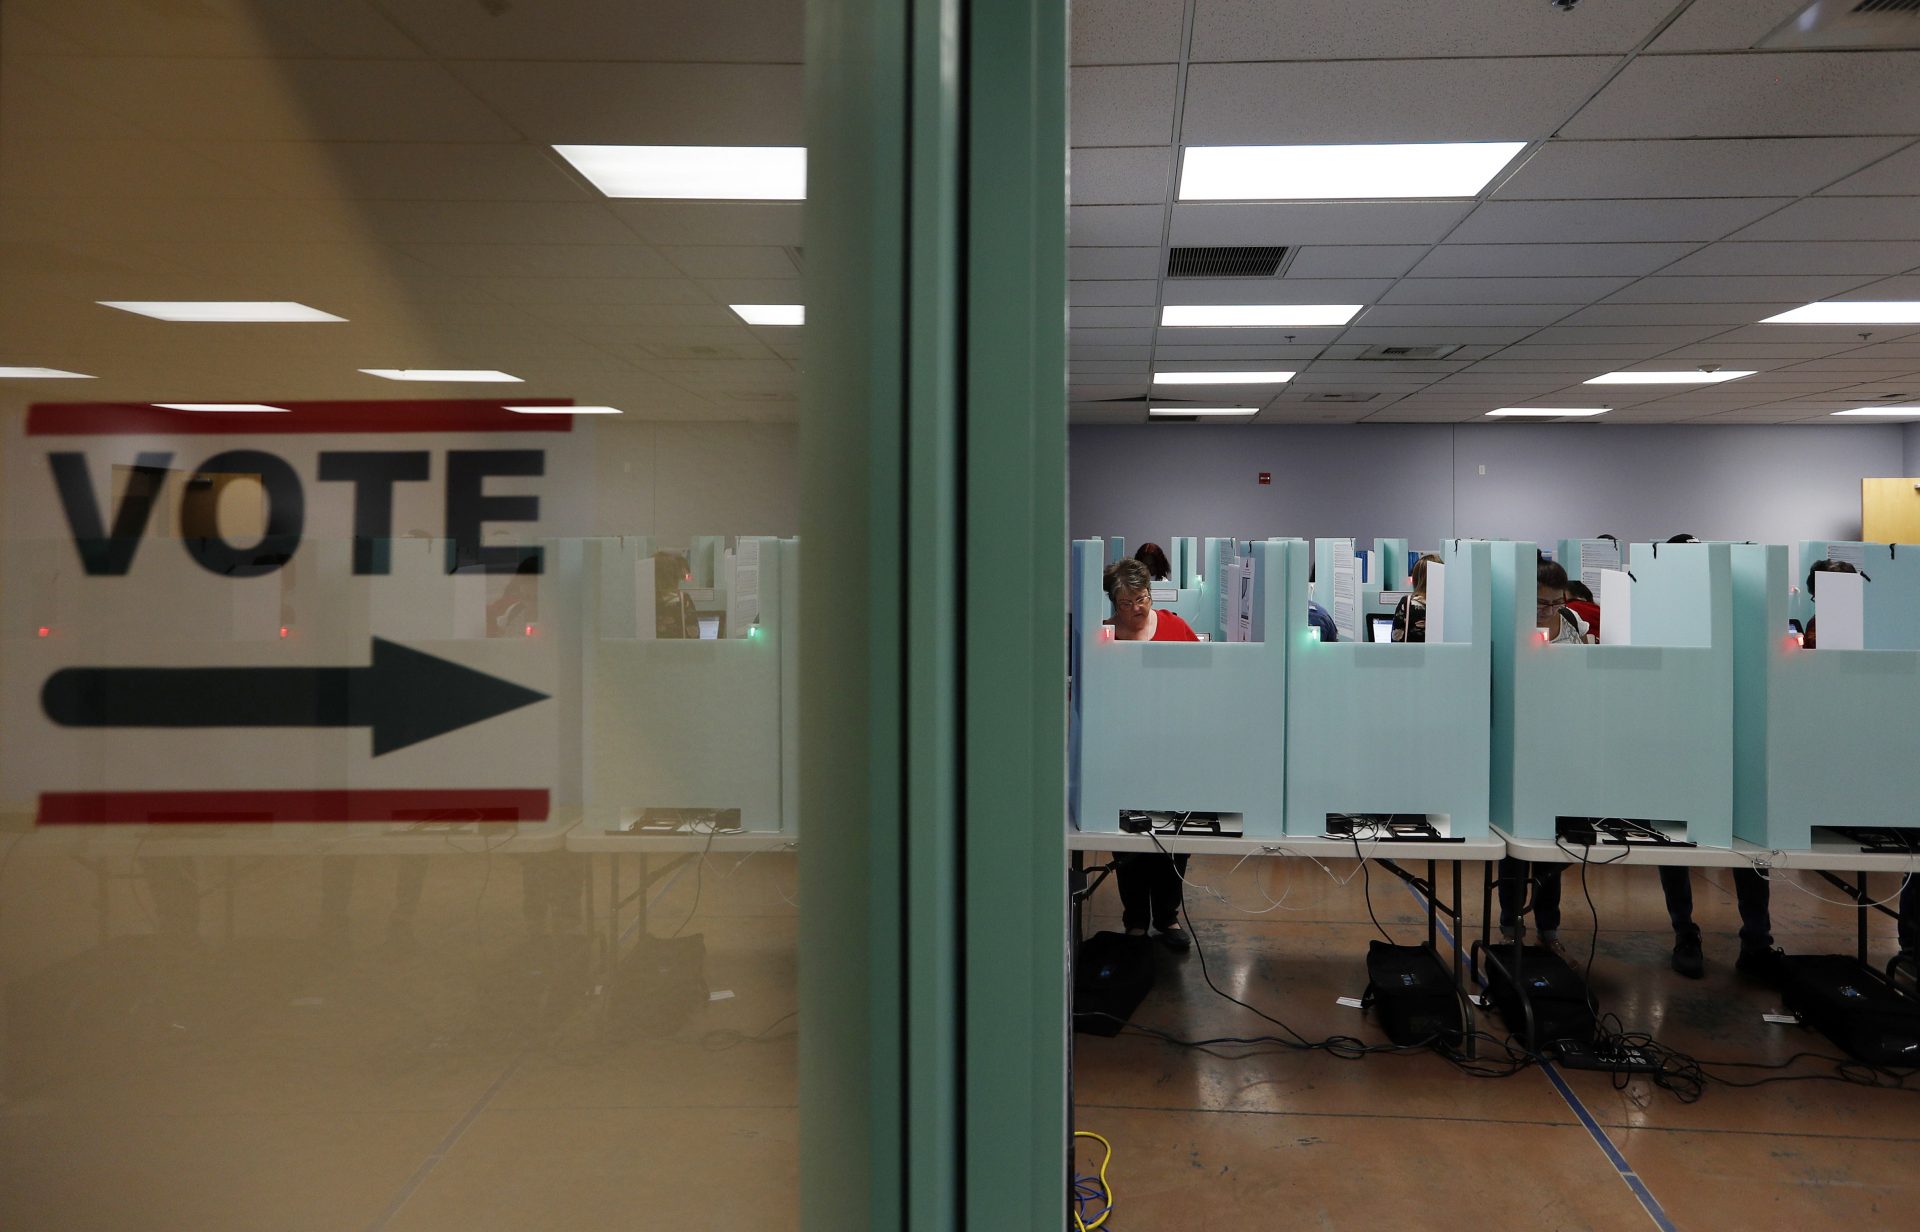 FILE PHOTO: In this Nov. 6, 2018, file photo, people vote at a polling place in Las Vegas. State election officials in at least two dozen states, including Nevada, have seen suspicious cyber activity in the first half of January 2020, although itâ€™s unclear who was behind the efforts and no major problems were reported.